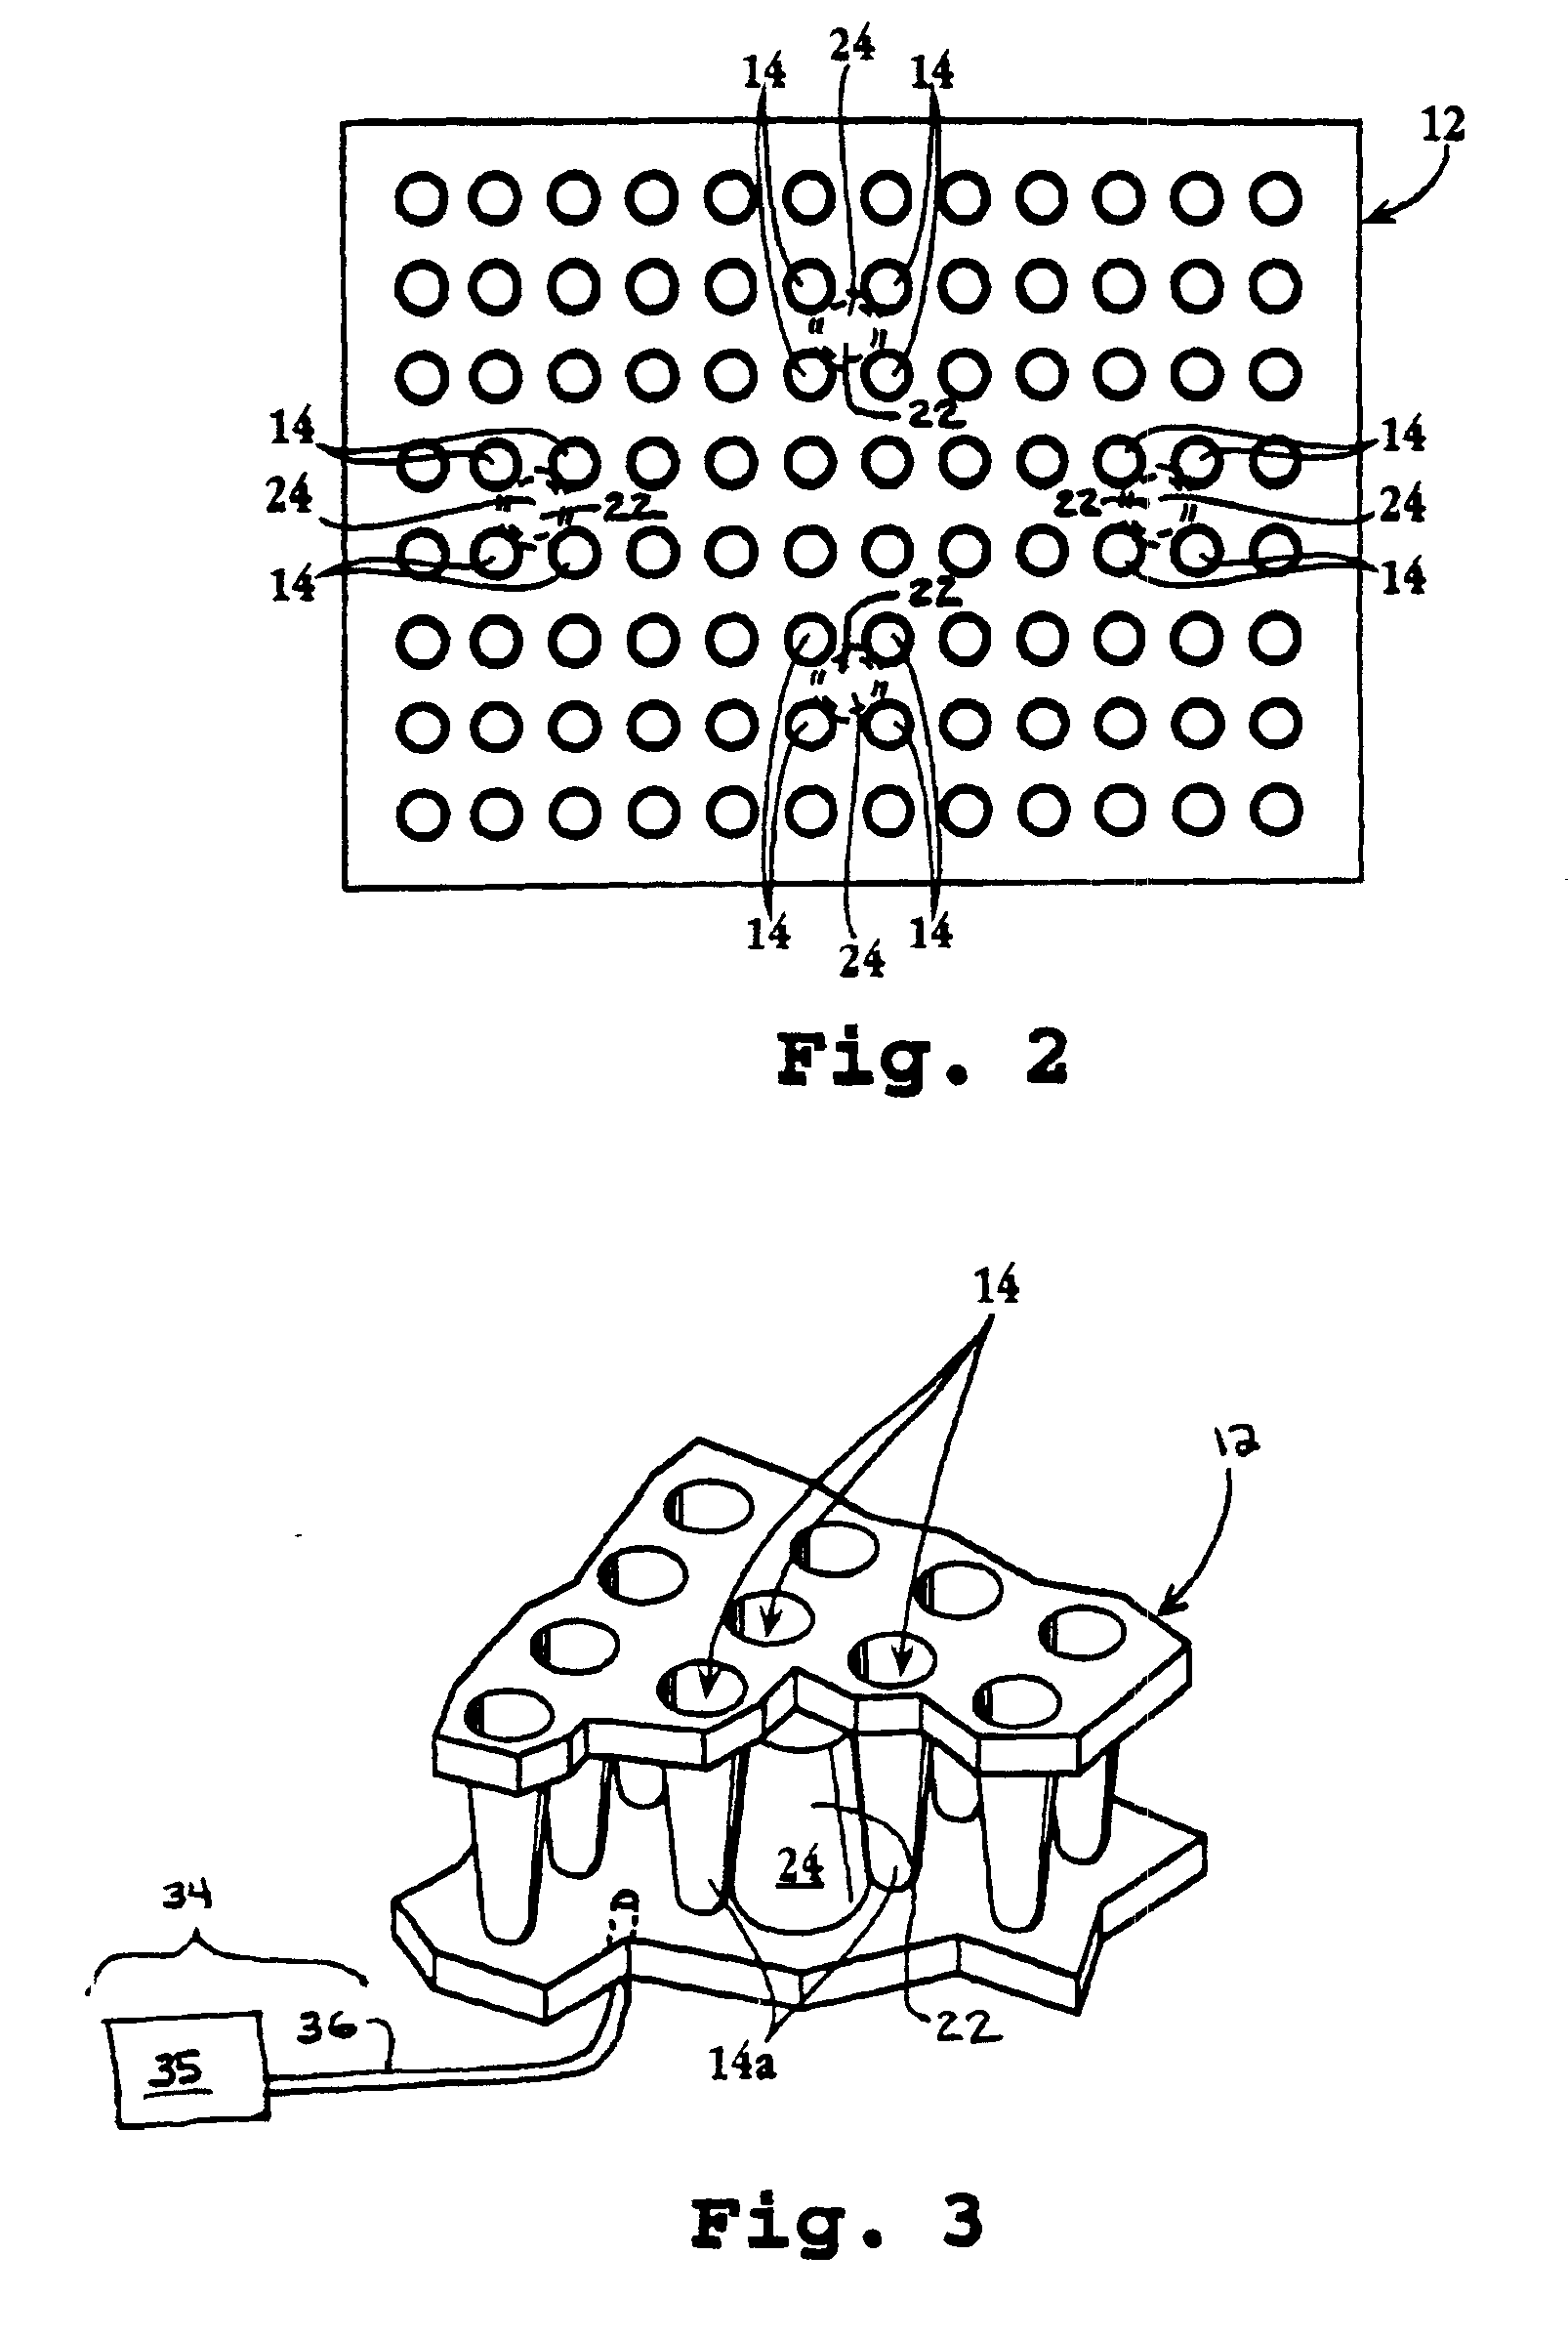 Apparatus for the precise location of reaction plates